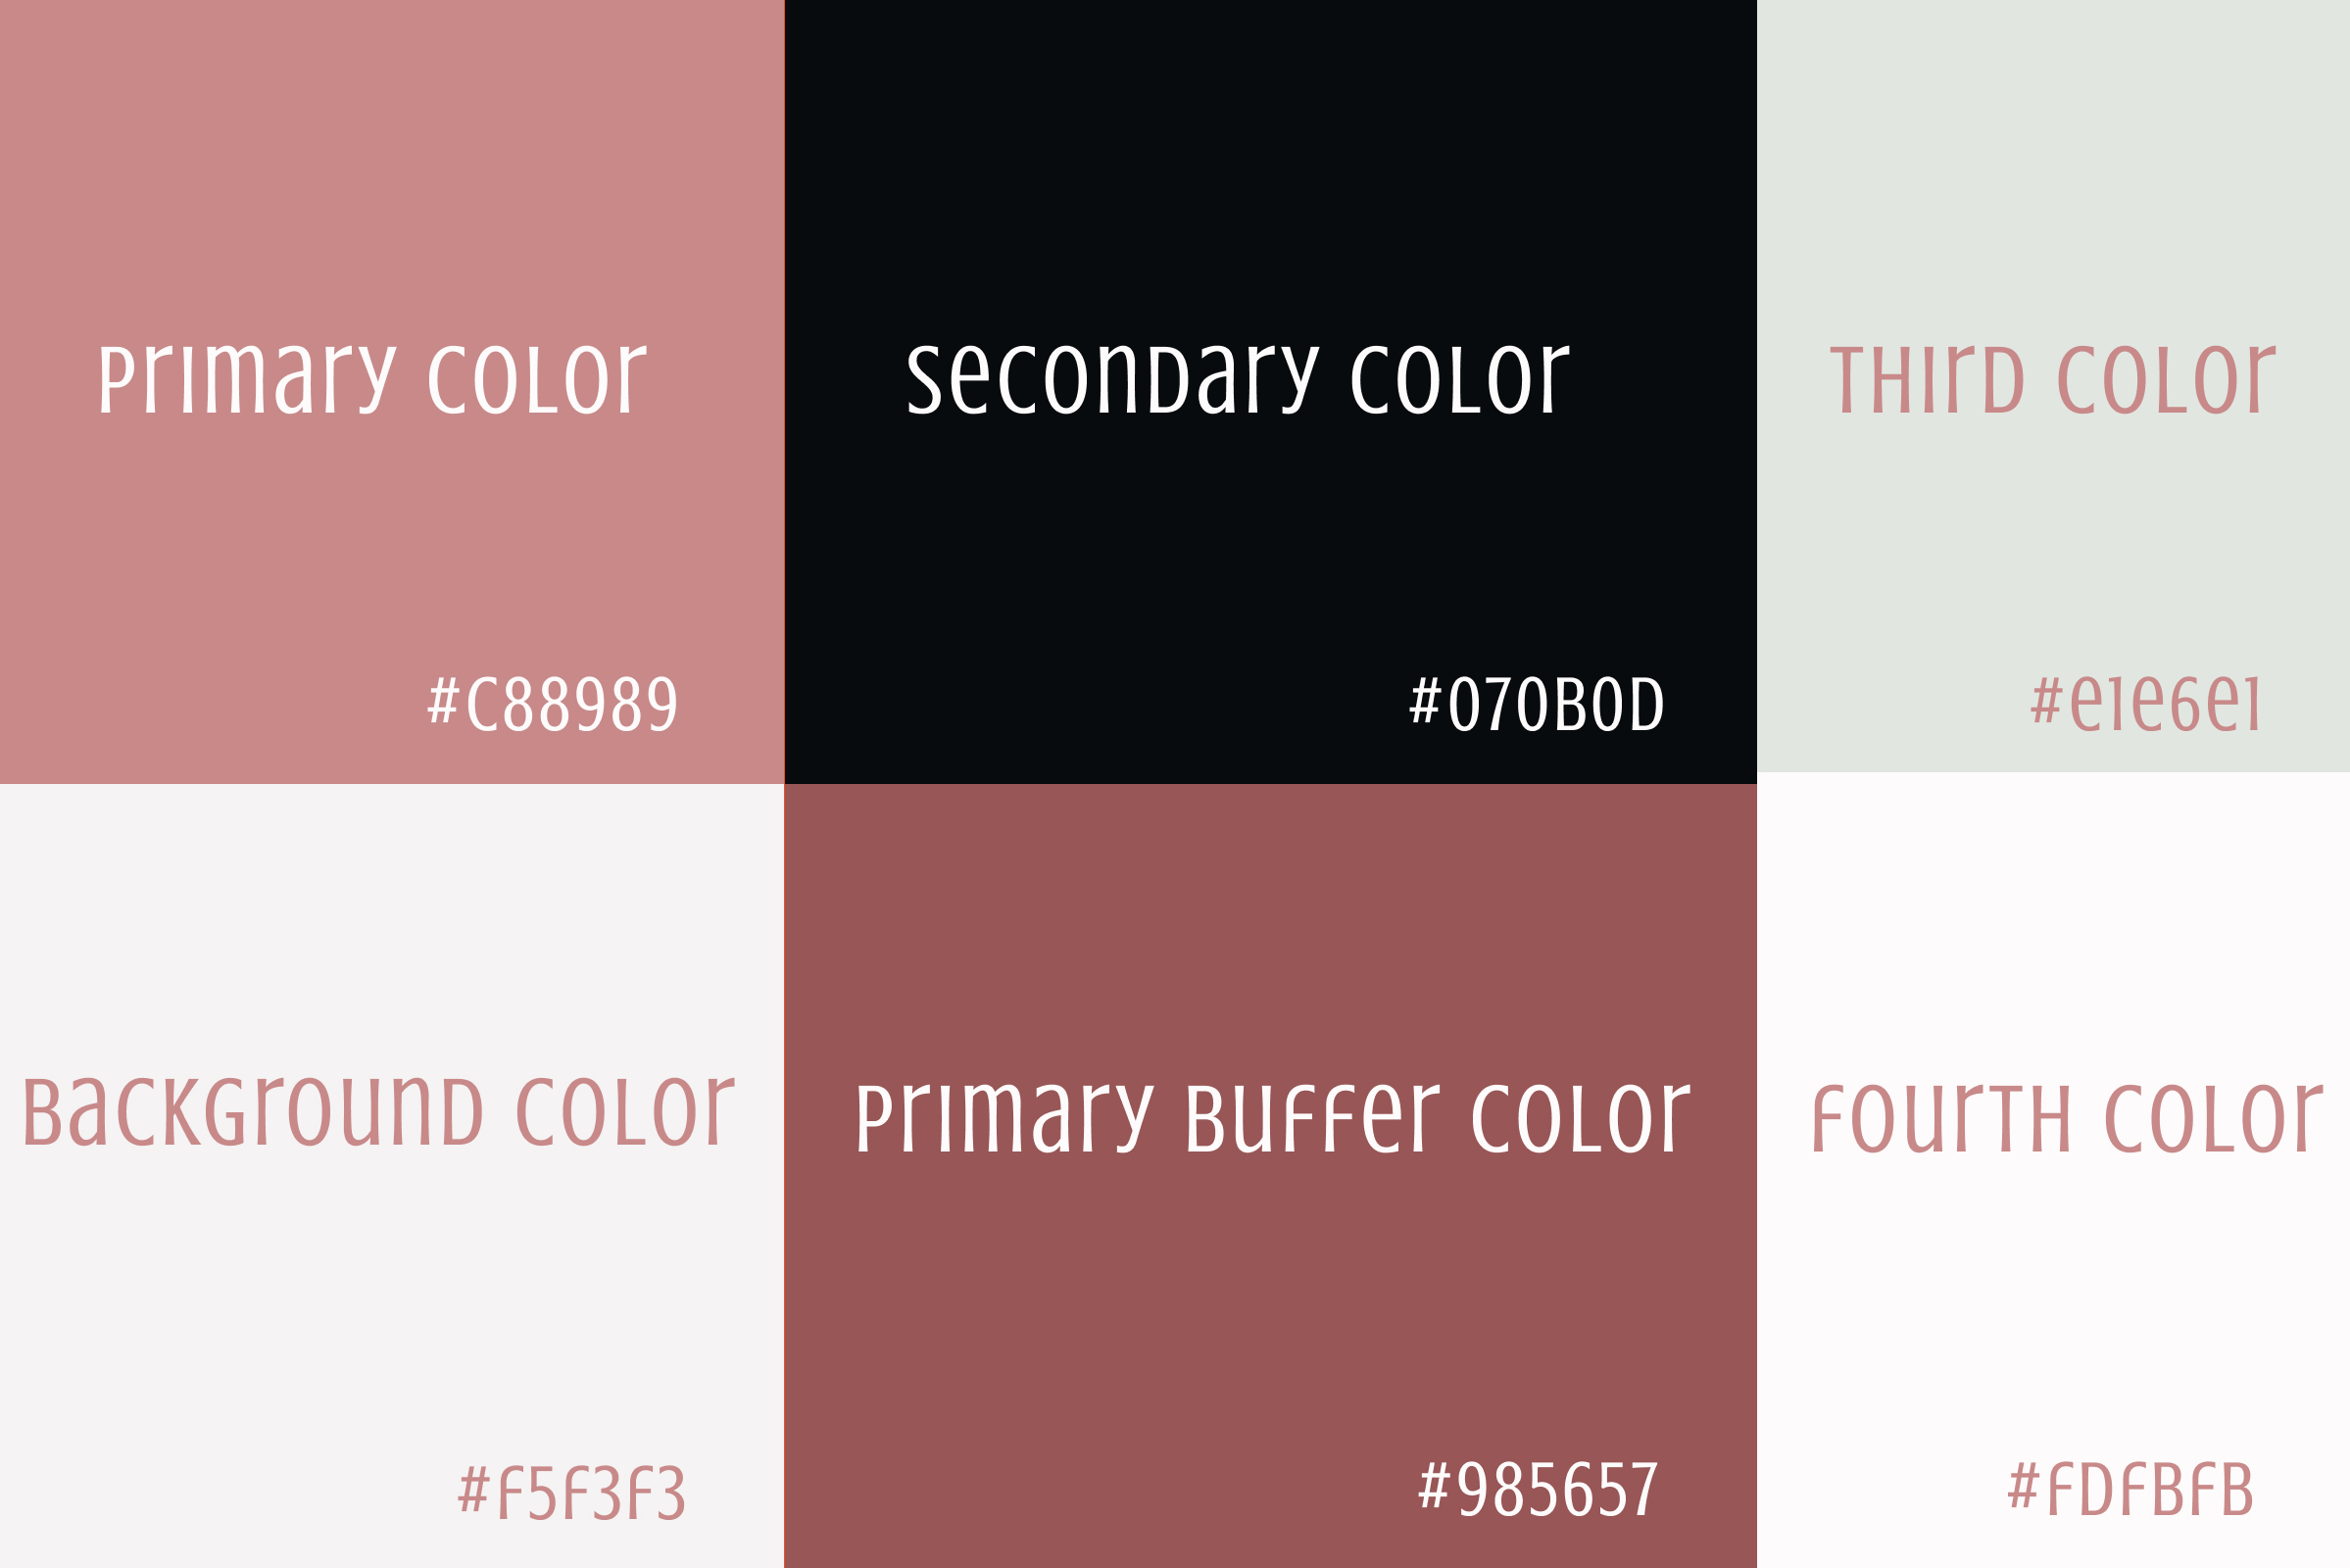 The color pallet used for the project. The primary color is a light pink. Secondary color is black. Third is light grey. Fourth is white used for background colors. Fifth color is the buffer primary color that is a dark sandy pink color and the last color is a variant of white.